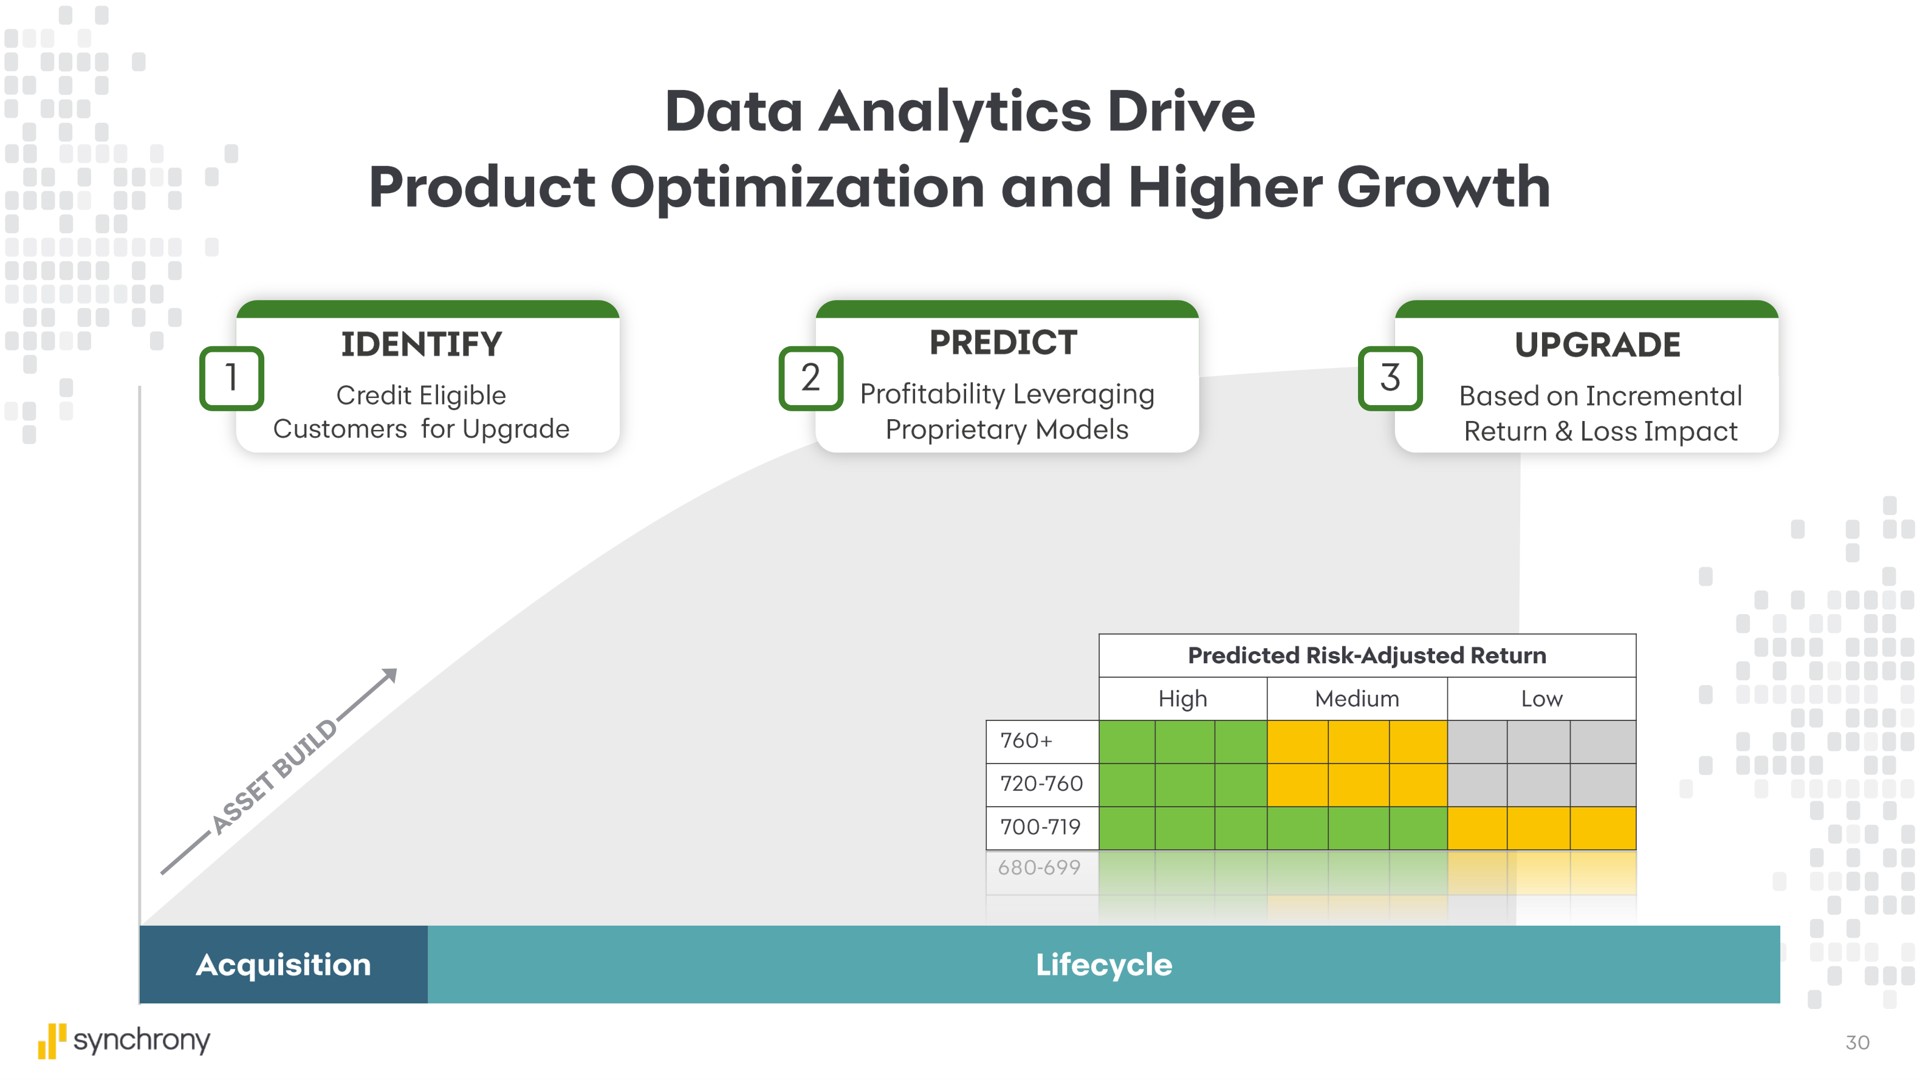 data analytics drive product optimization and higher growth | Synchrony Financial